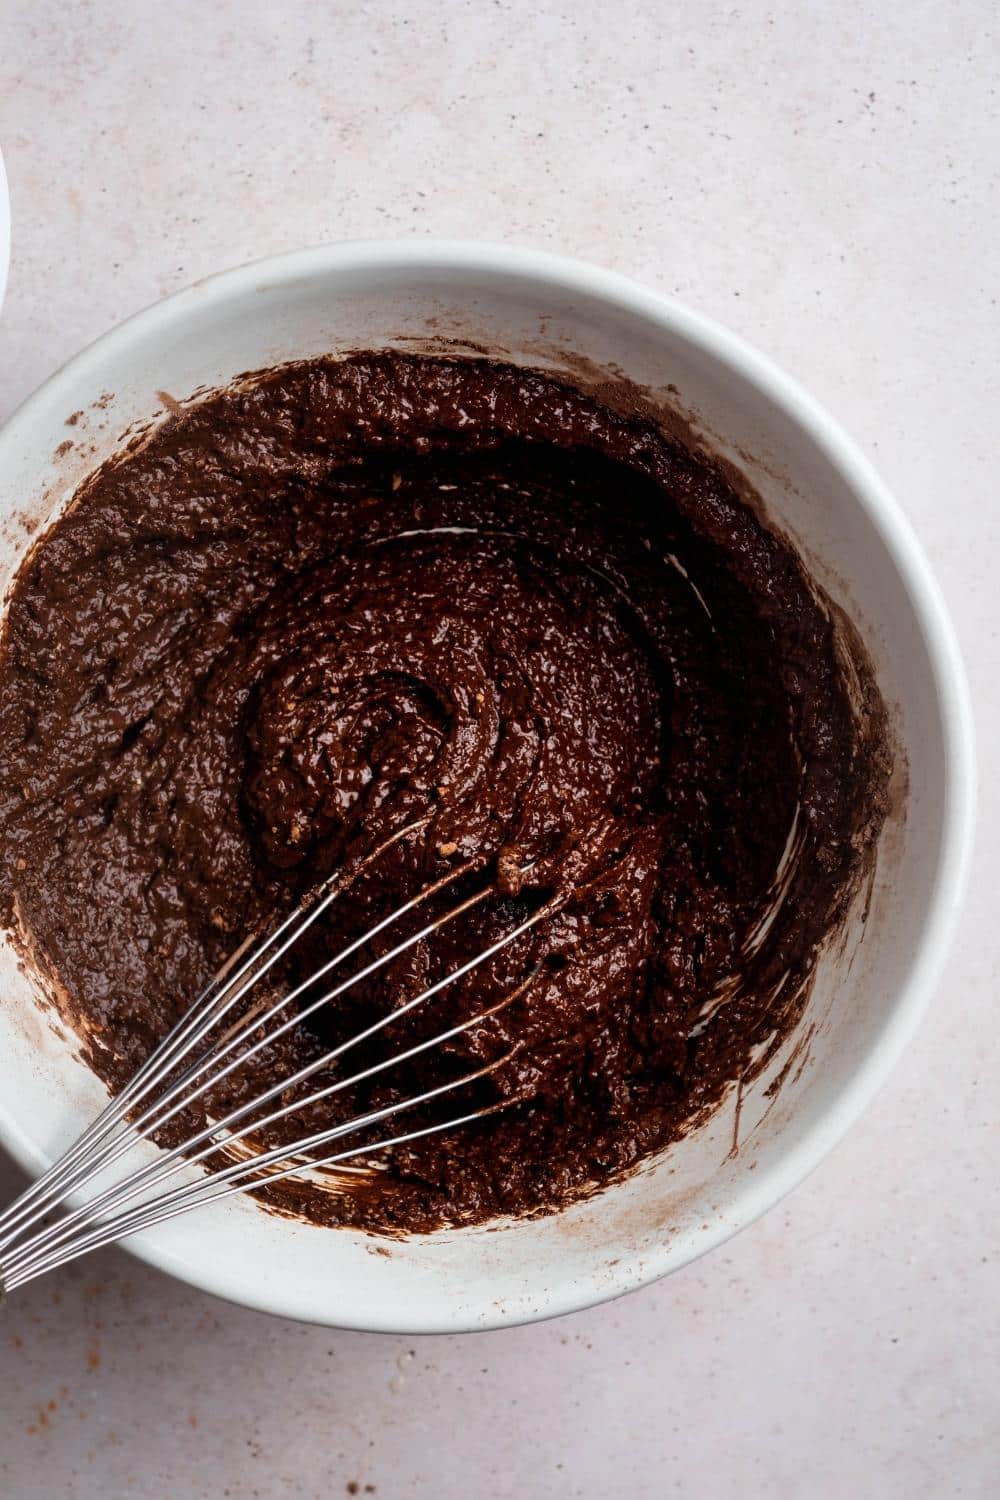 A bowl of chocolate donut batter with a whisk submerged in it.